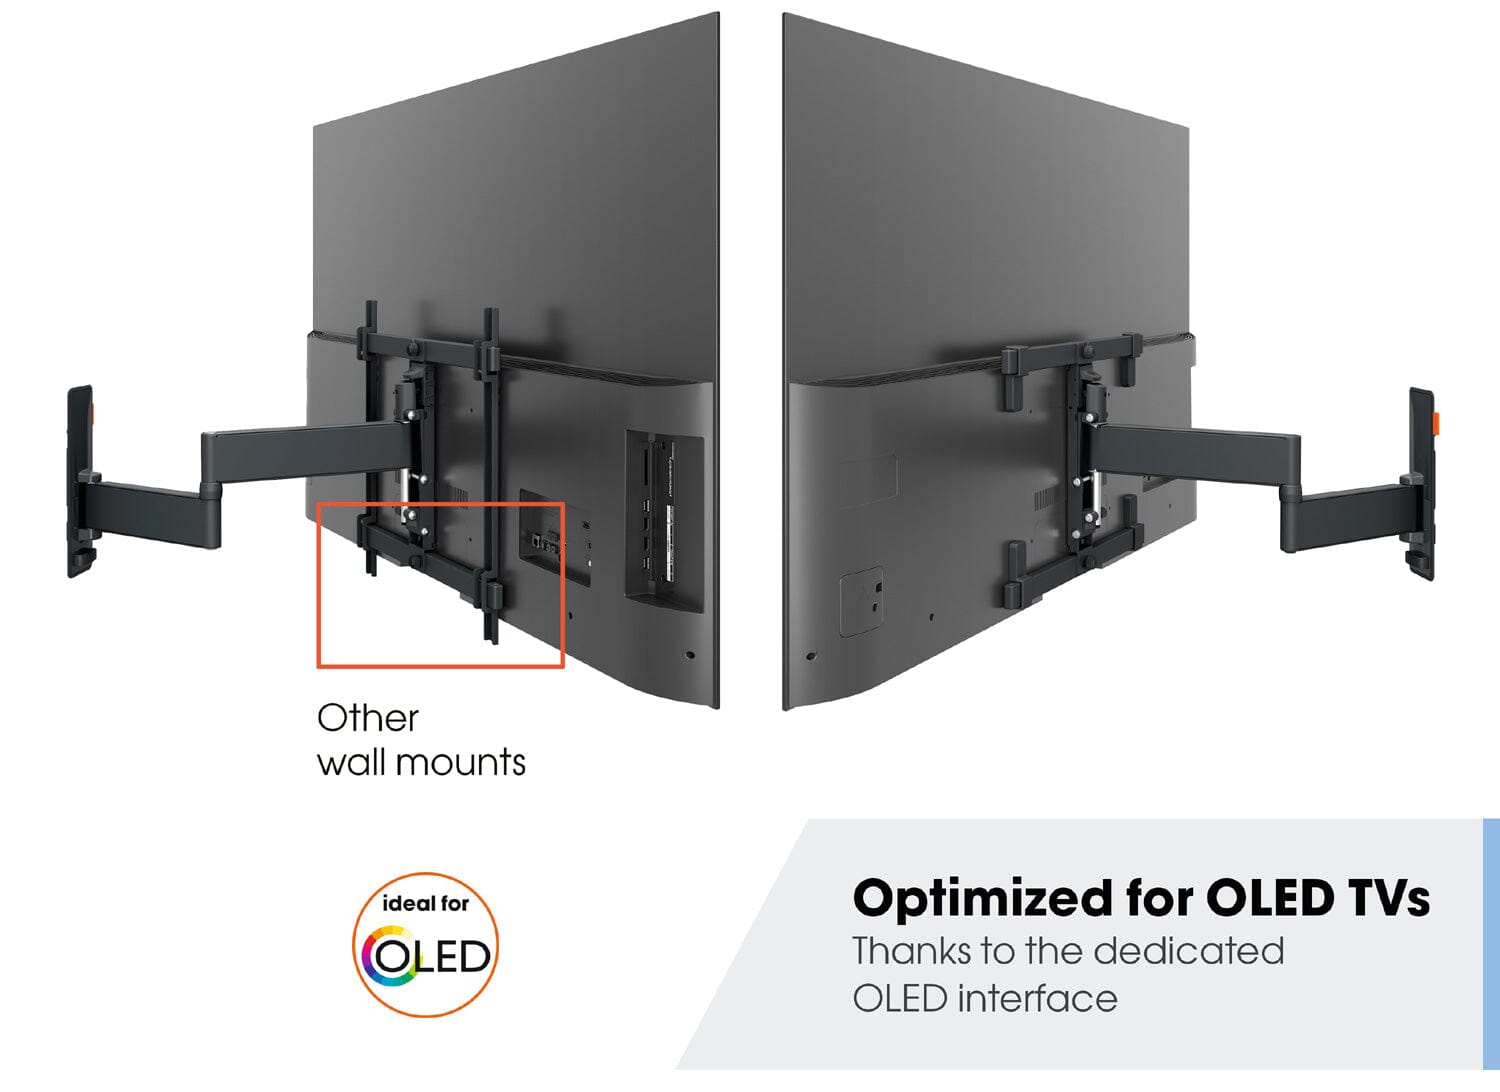 TV wall brackets specifically designed for OLED TVs